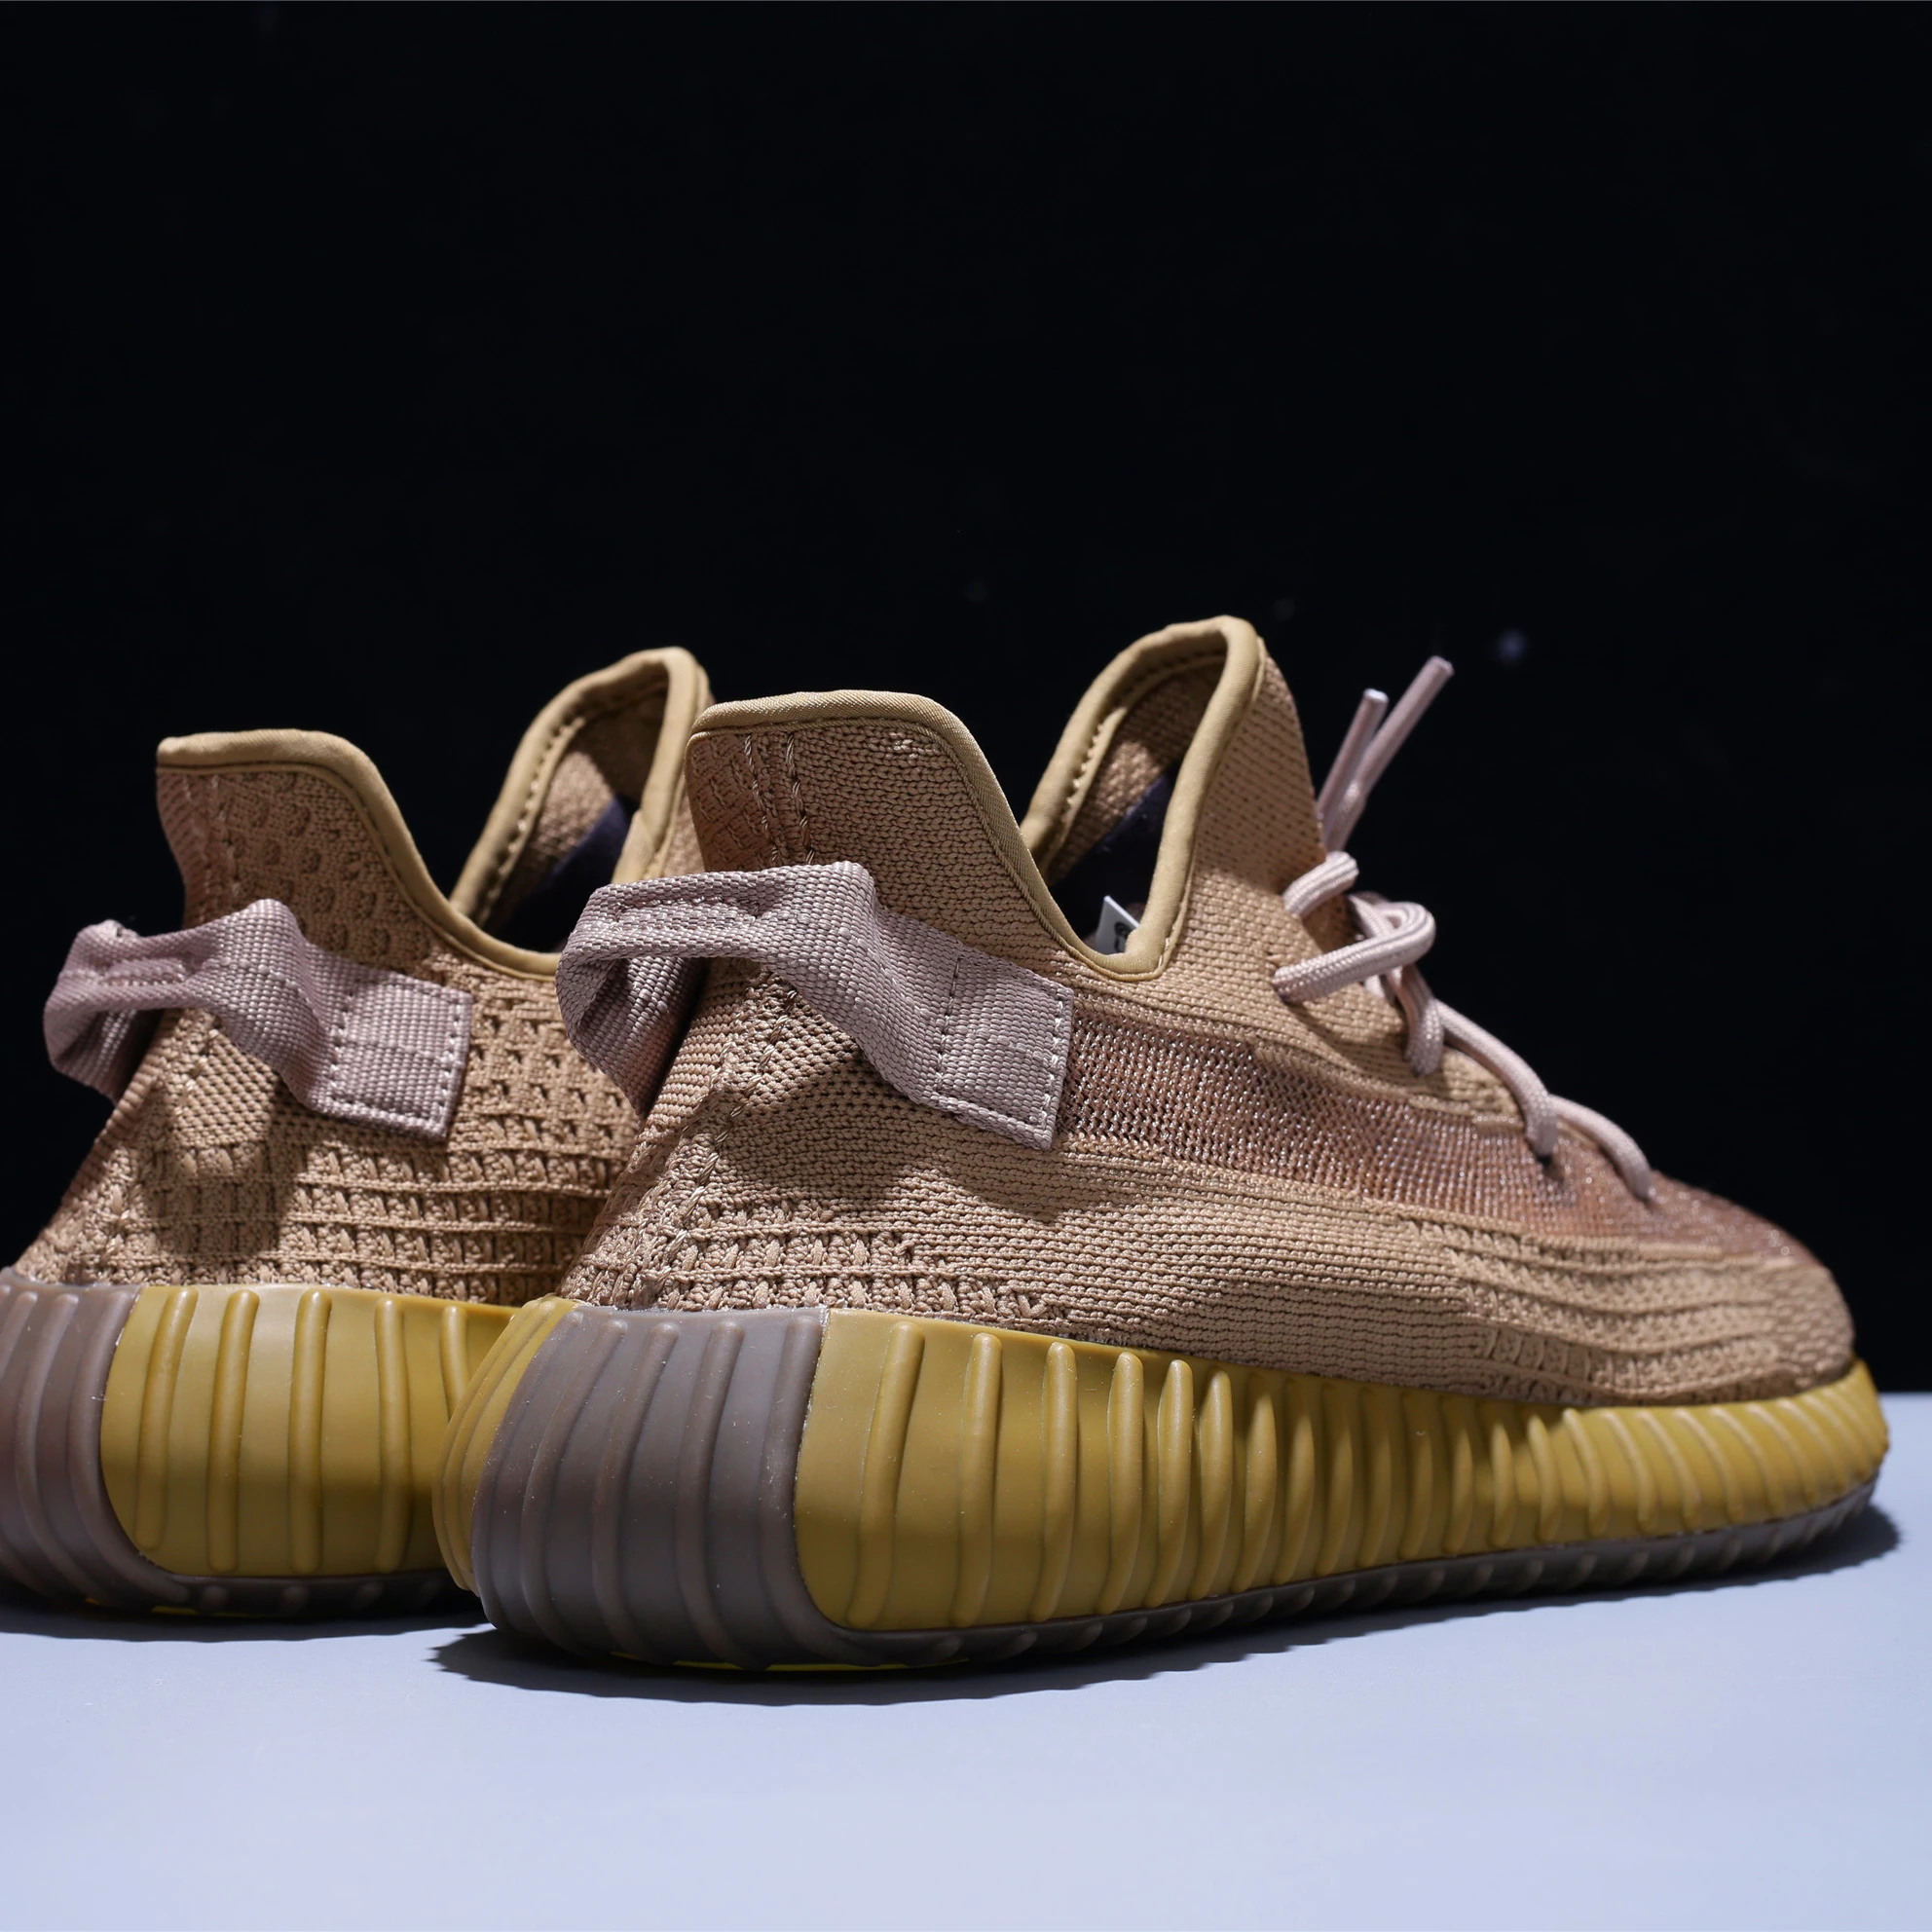 

high top quality 2020 new release yezzy 350 v2 FX9033 earth boots men women brand yeezi putian sneakers with euro size 36-48